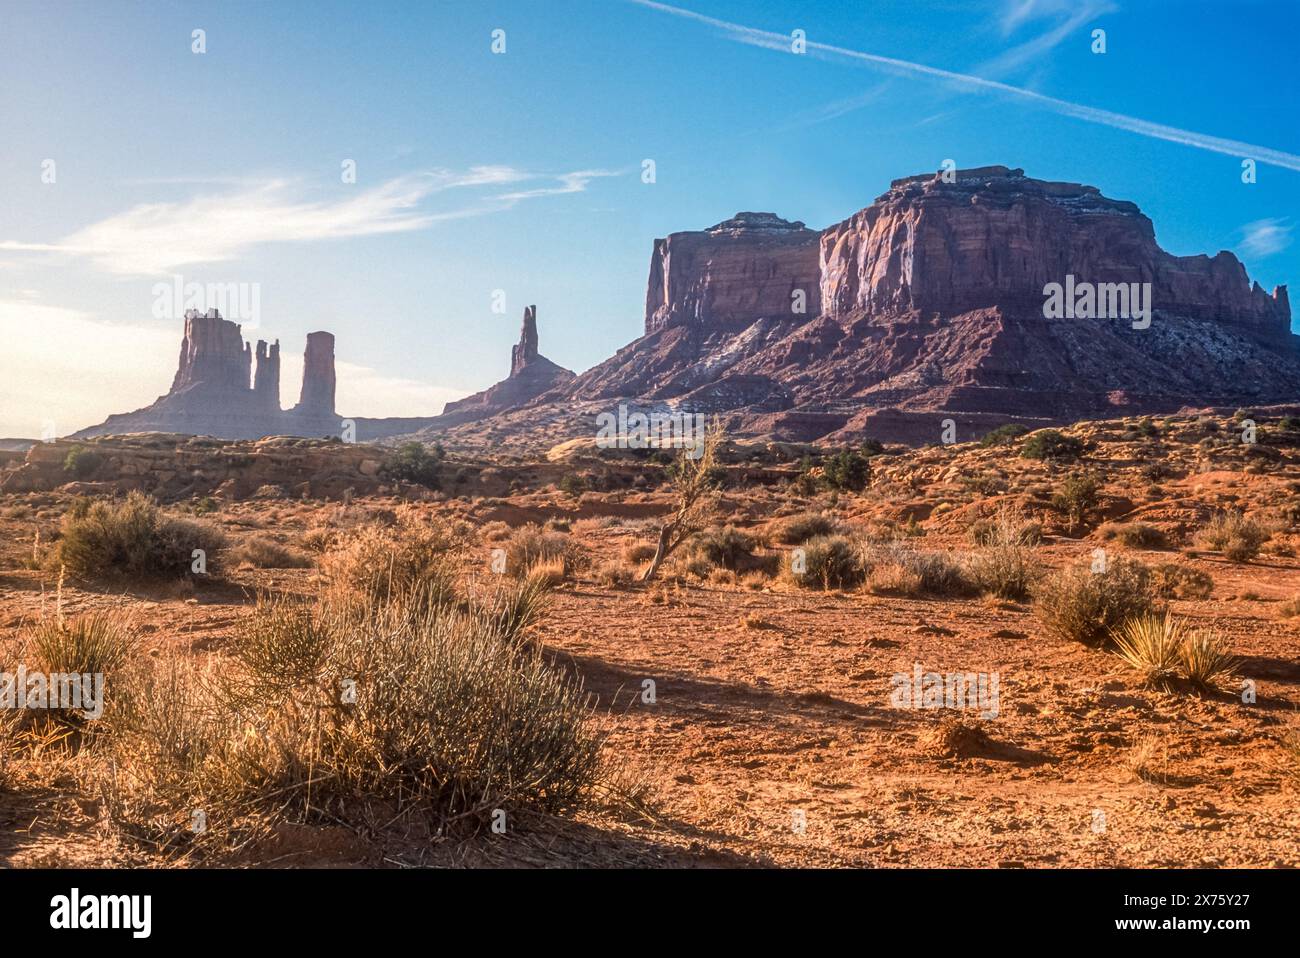 Sunrise view of the towering sandstone buttes of Monument Valley along the Utah/Arizona border in the American Southwest. (USA) Stock Photo